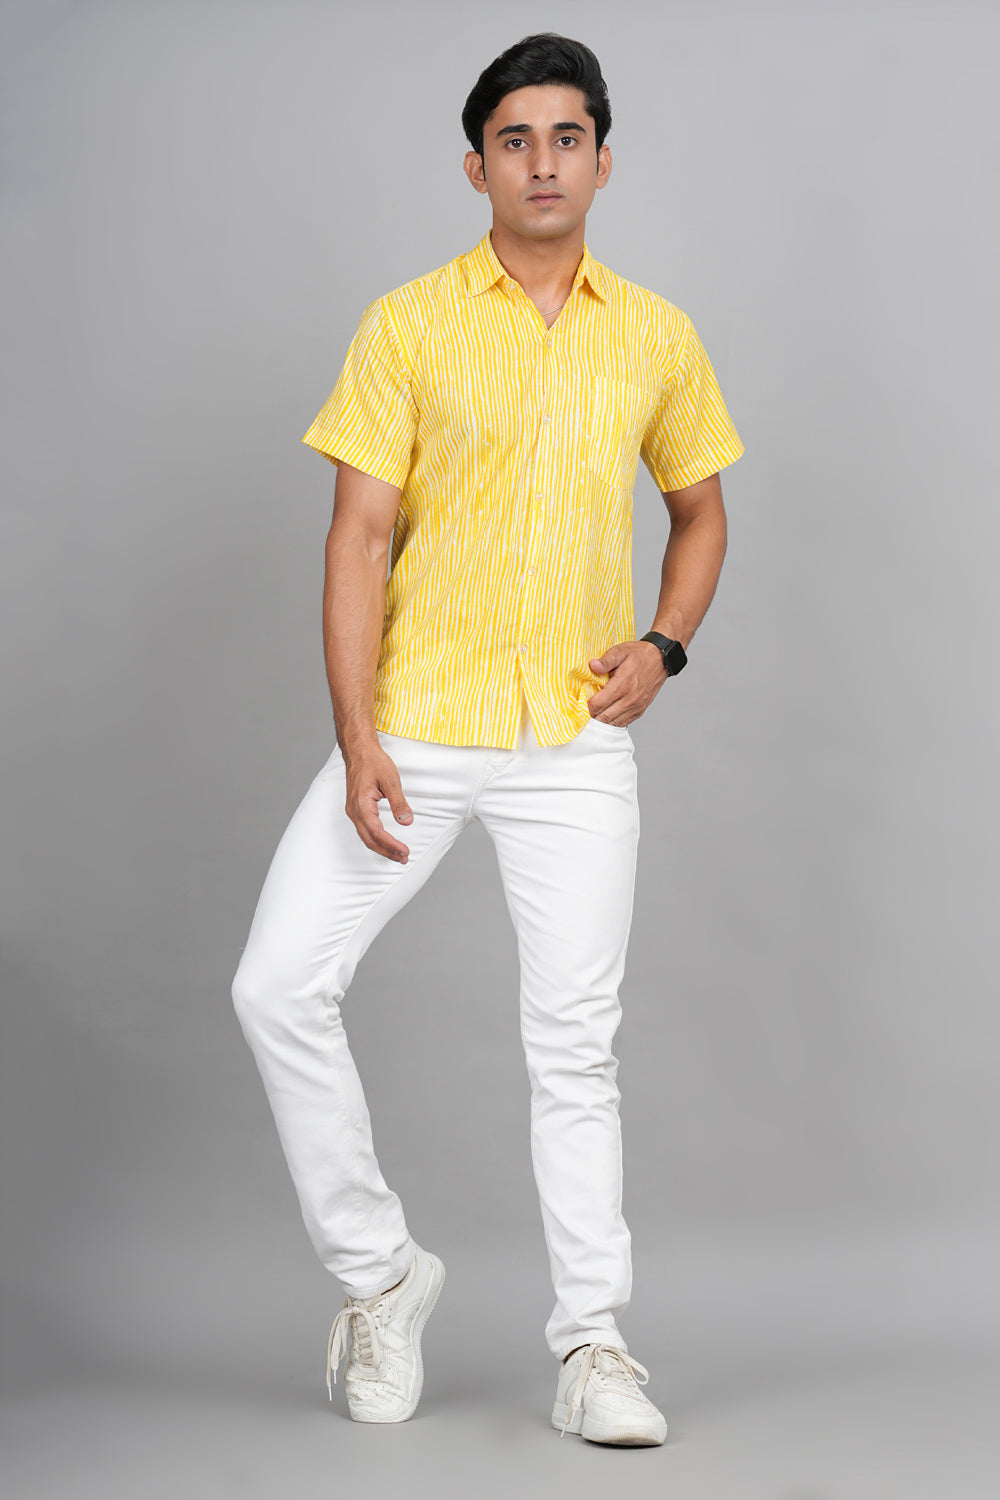 Yellow Embroidered Shirt White Pant and Shoes OOTD for men  Best Fashion  Blog For Men  TheUnstitchdcom